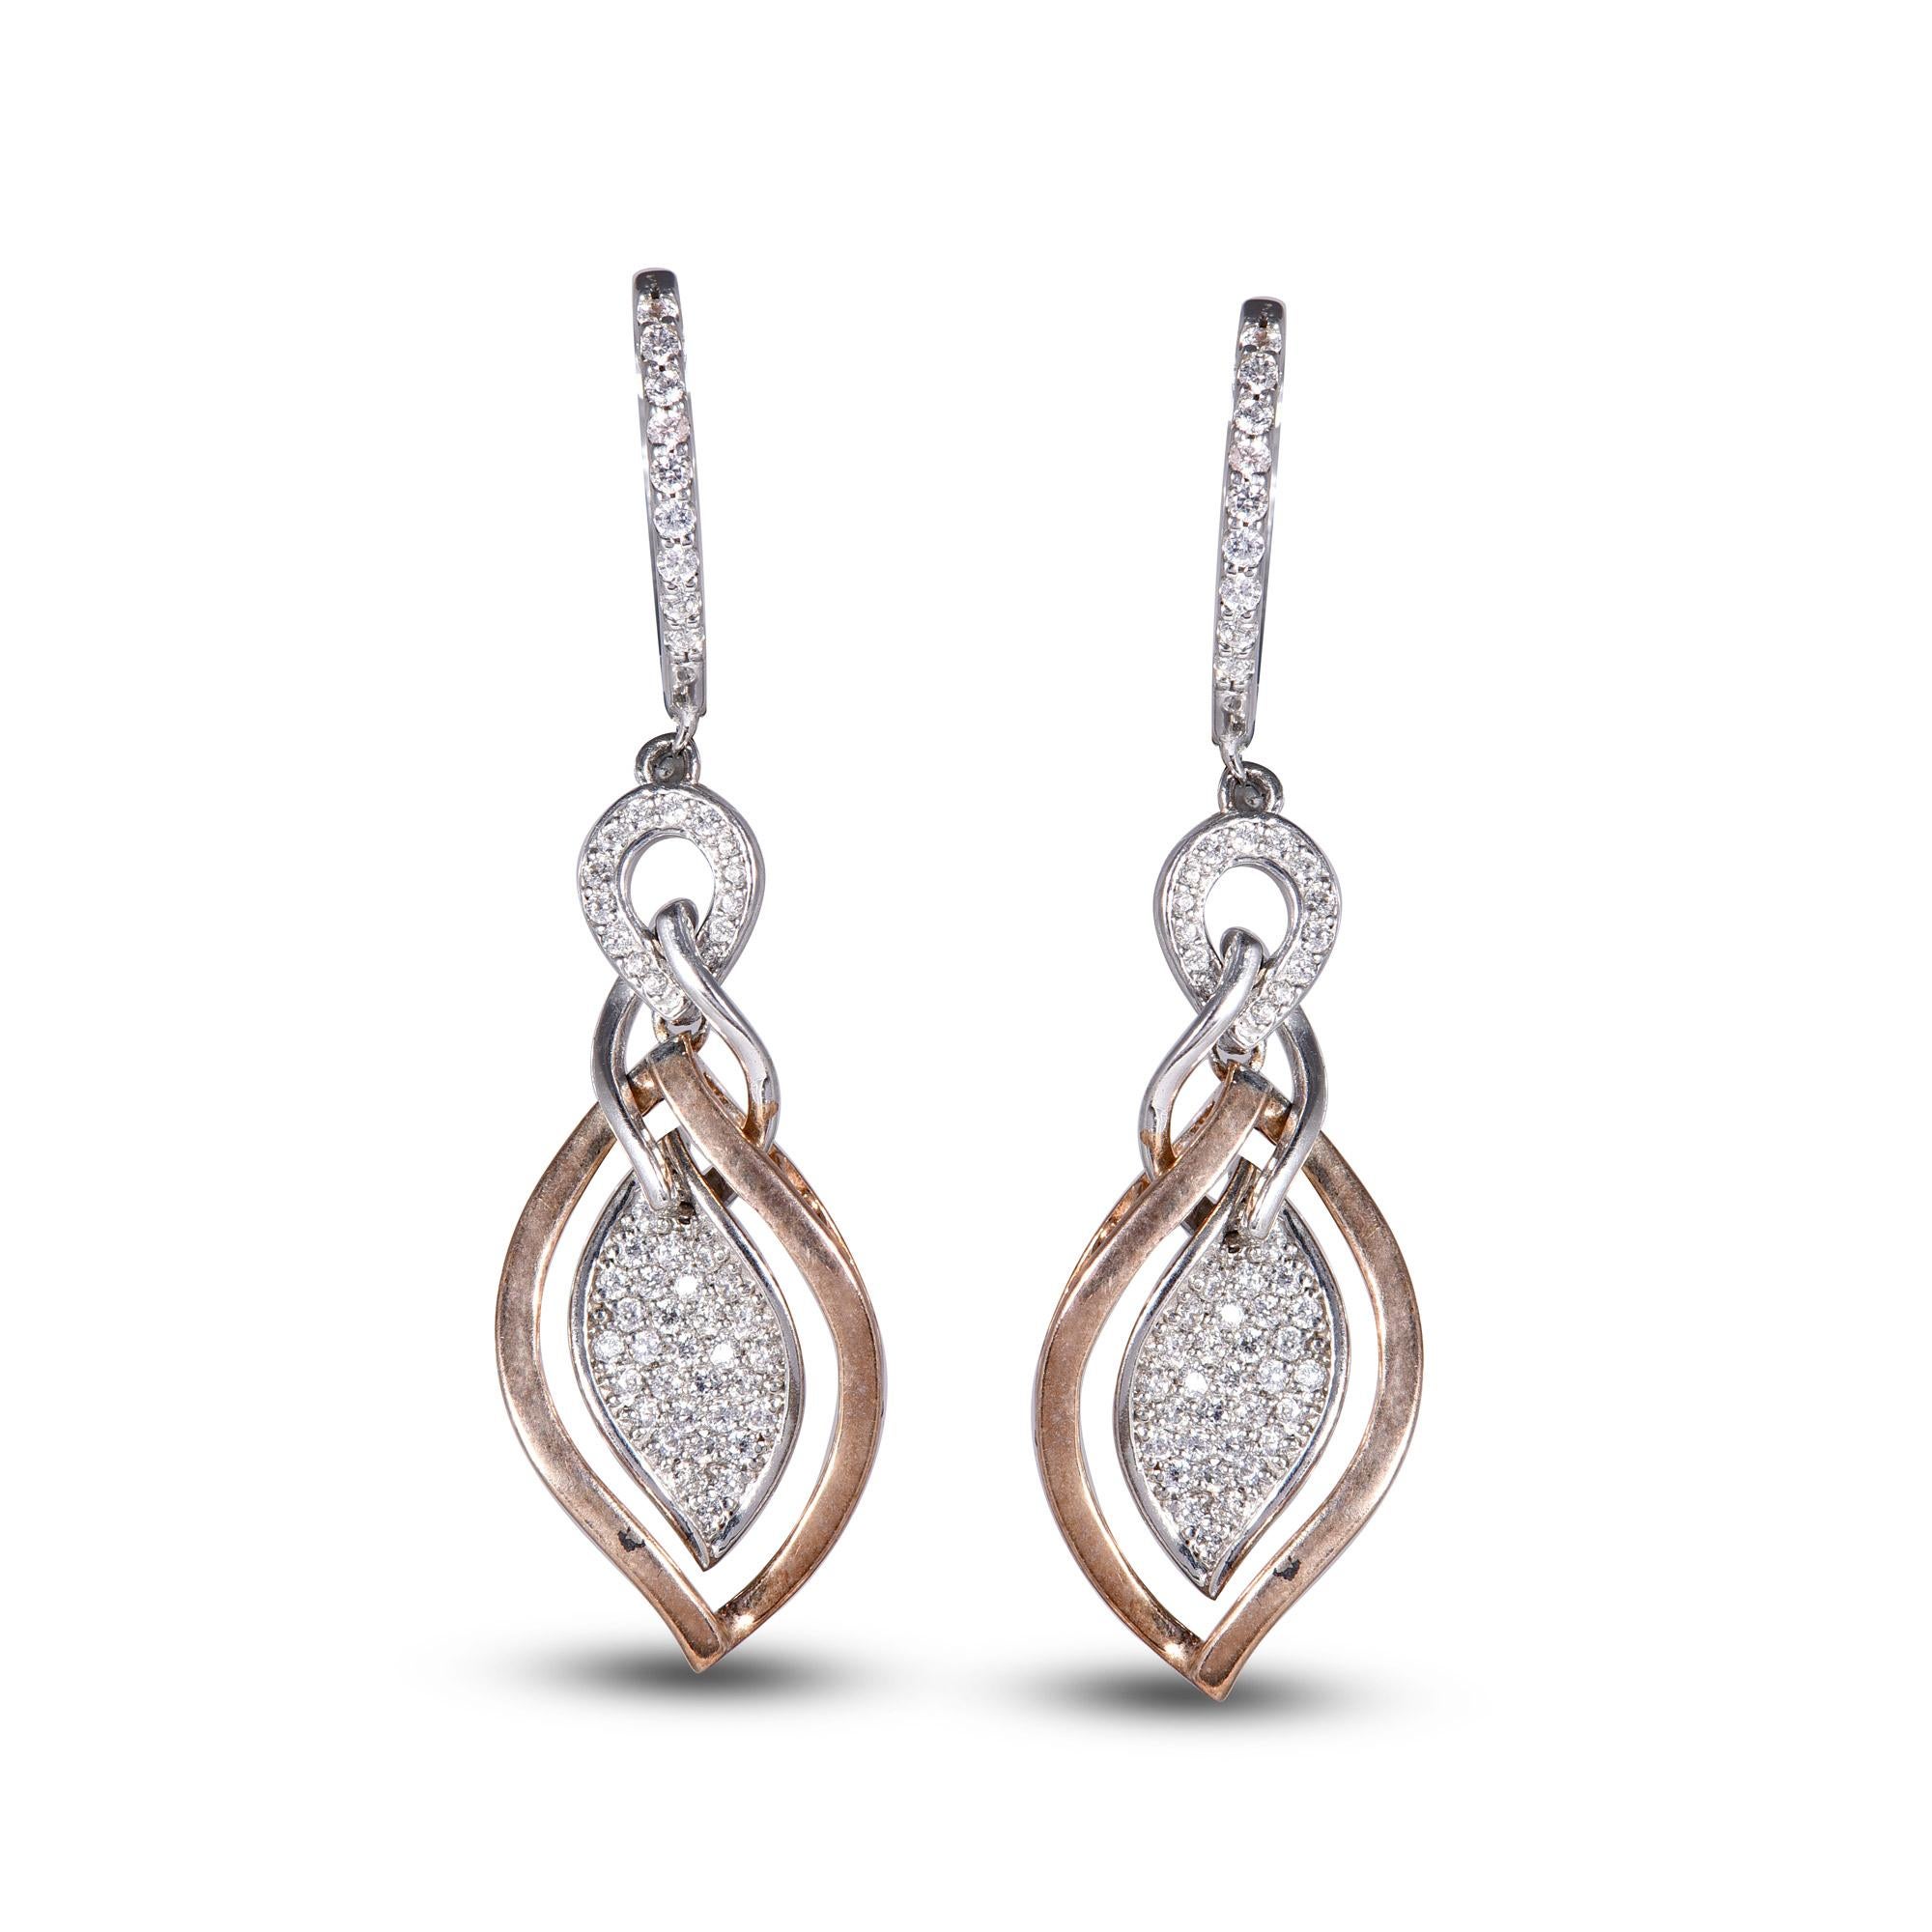 Adorn your formal wear with extra glitz when you put on these hoop huggie earrings. Expertly crafted in 18K White and Rose Gold,  earring is cleverly filled with 68 round diamonds. Captivating with 0.45 carats diamonds and a bright polished shine,